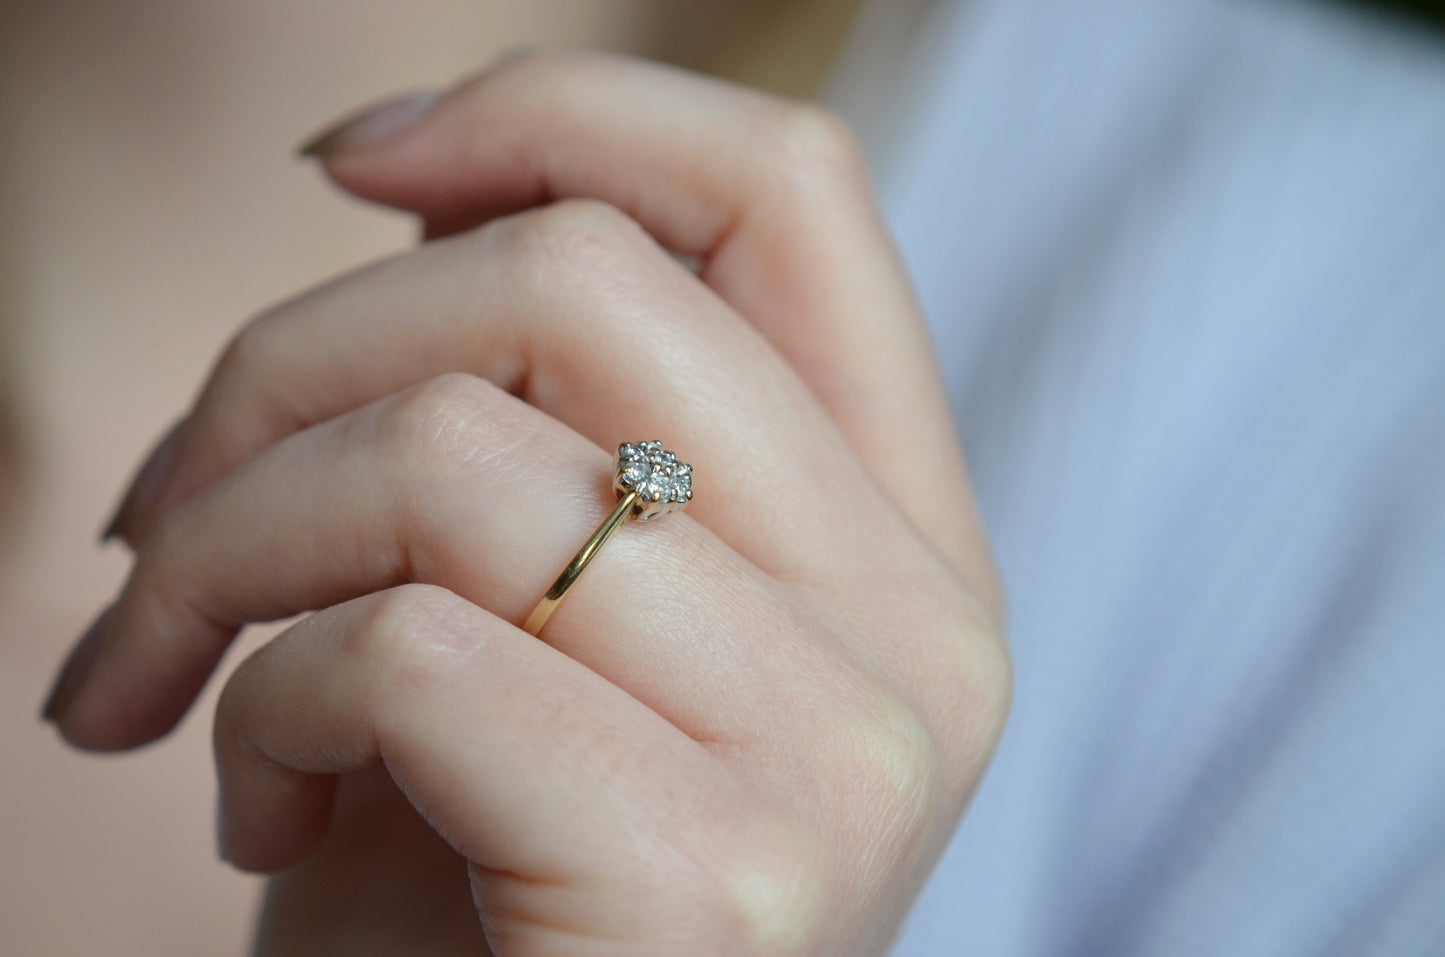 Dainty Edwardian-Inspired Cluster Ring